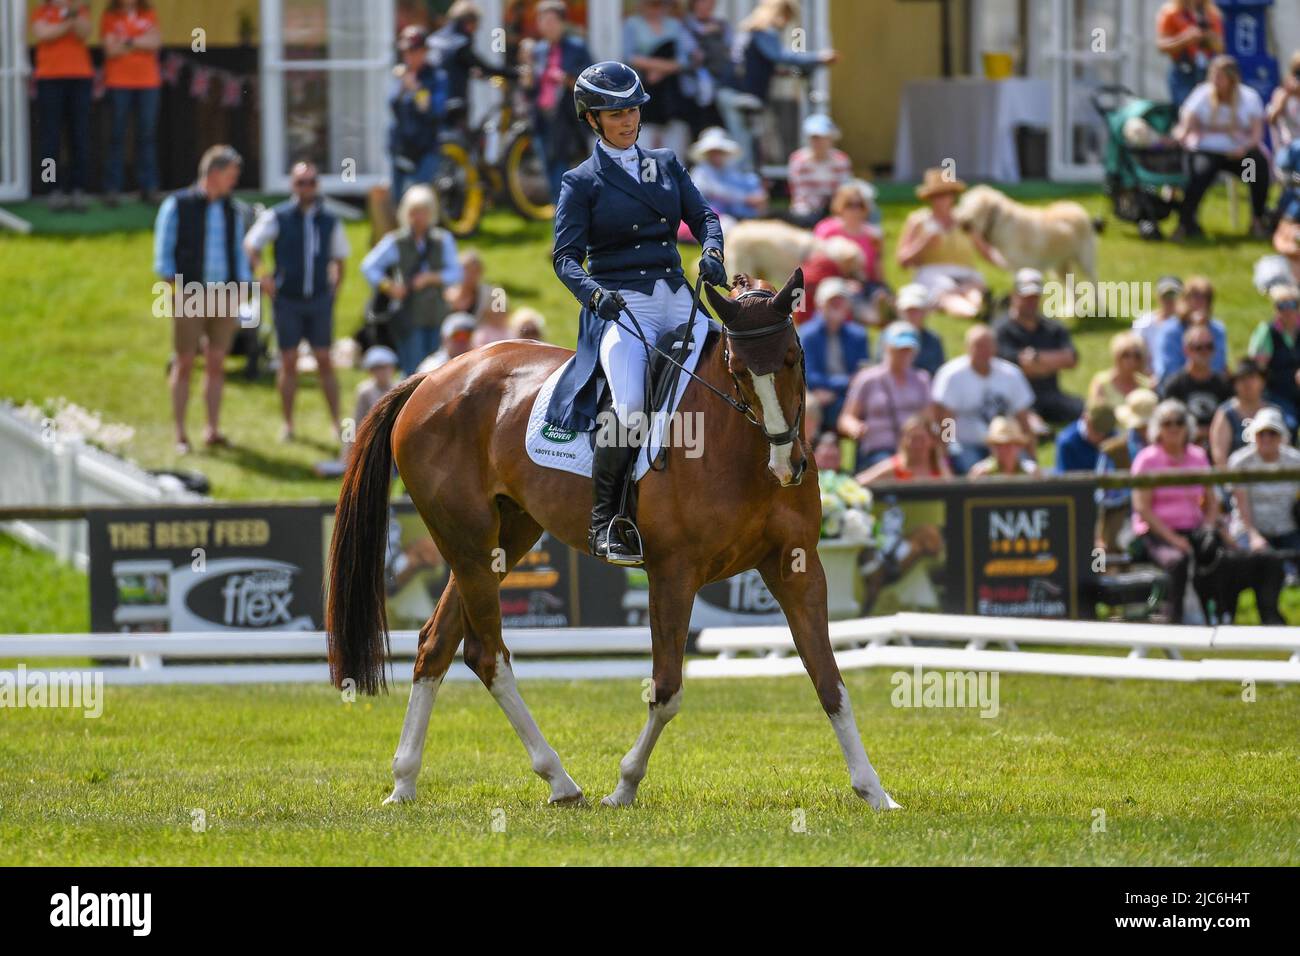 Bramham International Horse Trials, Bramham Park, near Wetherby in West Yorkshire in the UK. 10th June, 2022. Zara Tindall riding CLASS AFFAIR for GBR in the dressage phase of the CCI-L 4* at the Bramham International Horse Trials  Credit:Peter Putnam/Alamy Live News Stock Photo